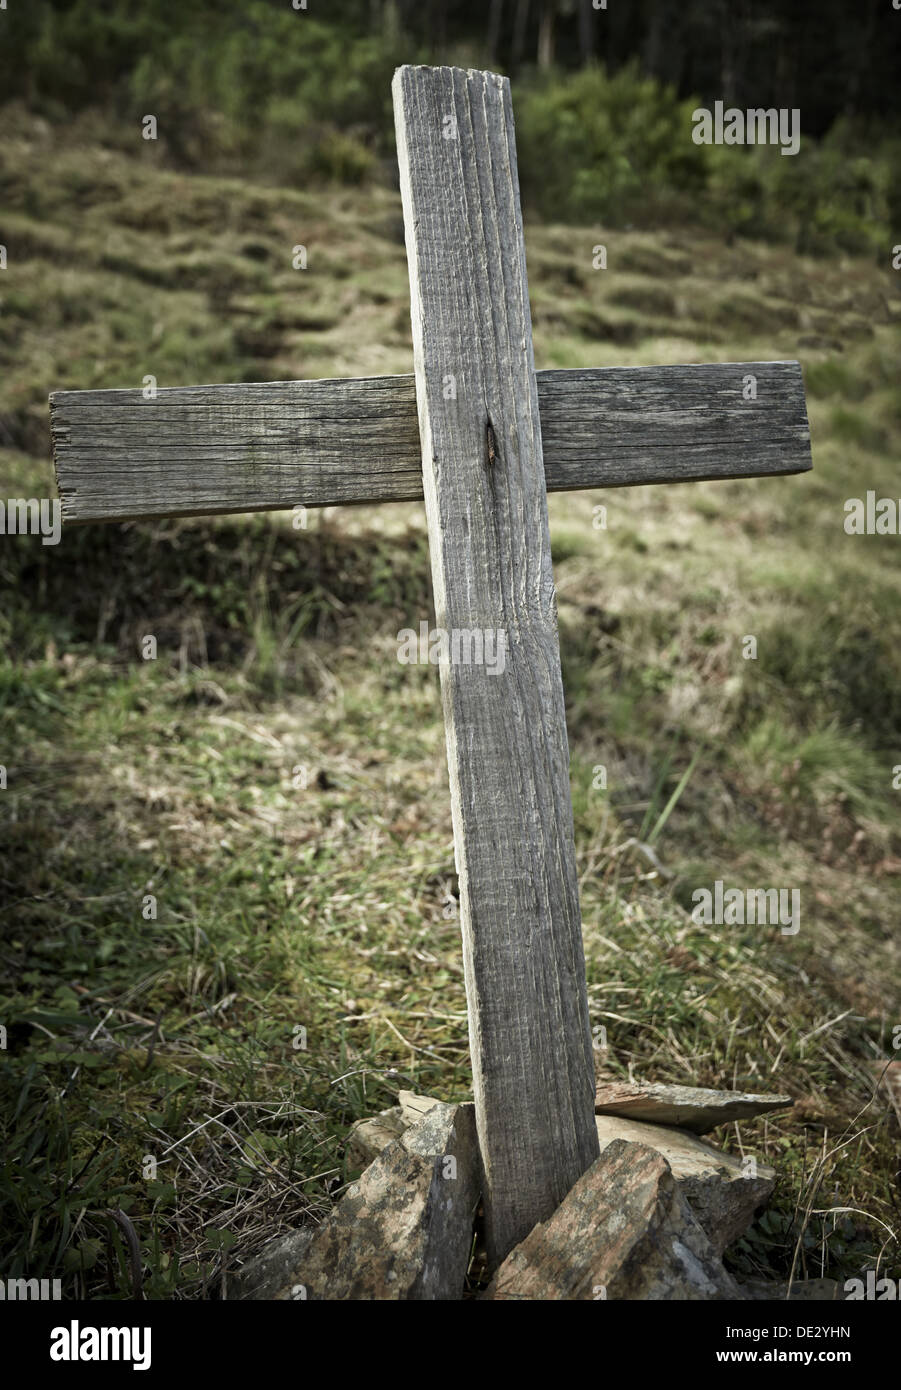 An old wooden cross marking a grave Stock Photo